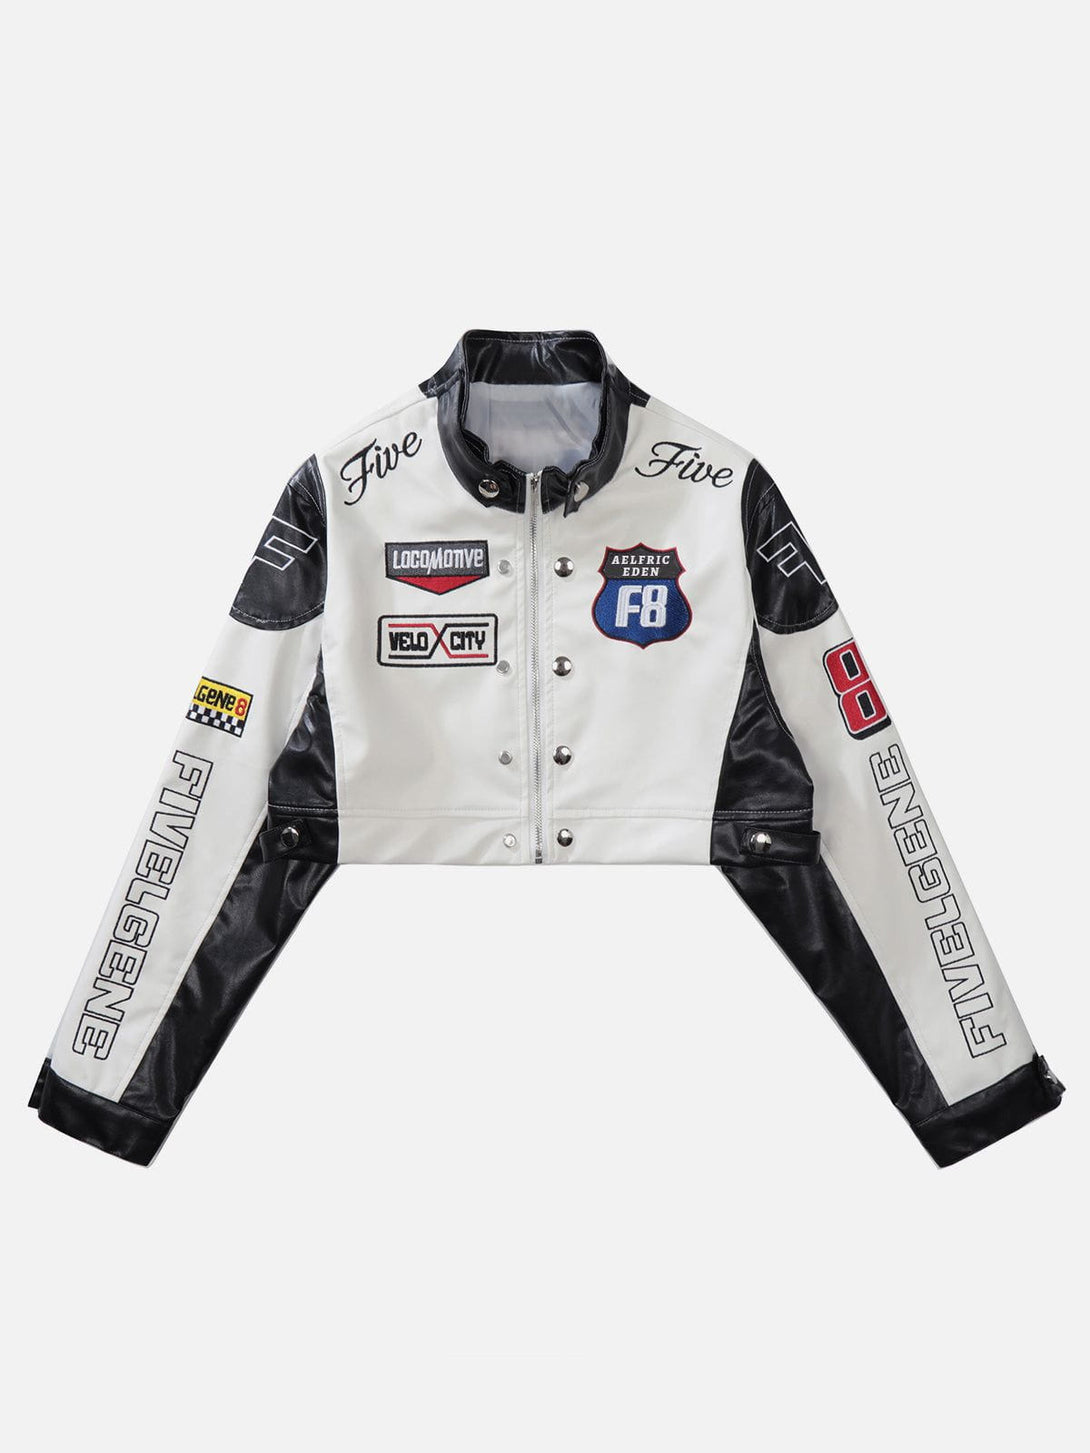 Levefly - Ambition Motorcycle Crop Jacket - Streetwear Fashion - levefly.com